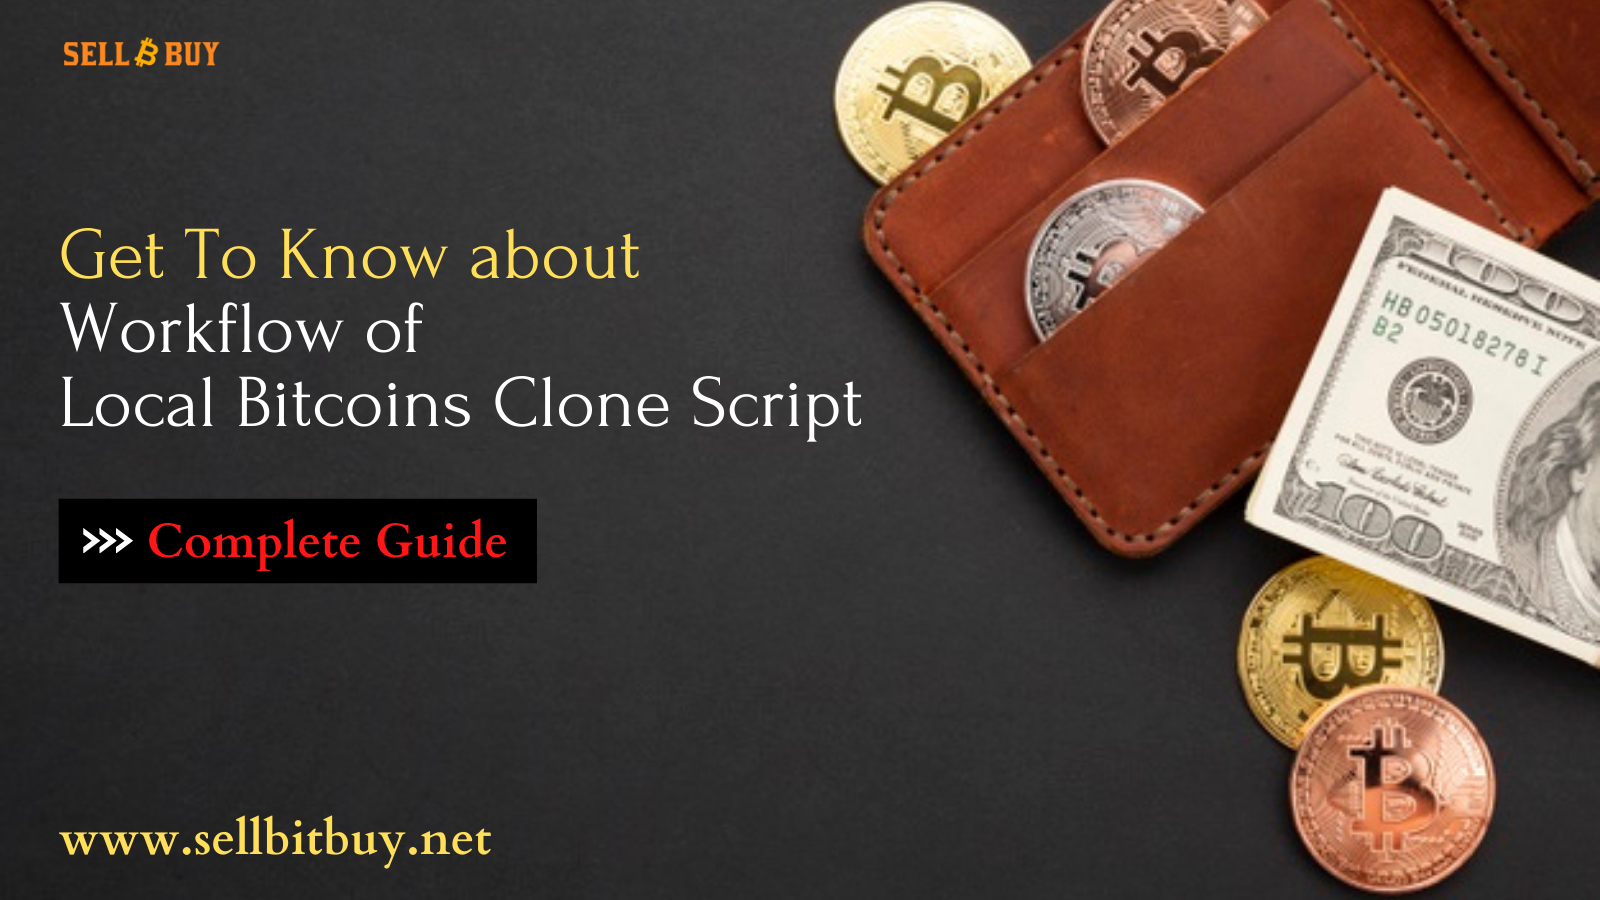 How Our Local Bitcoin Clone Script Works? All You Need to Know about our Ready to Market Localbitcoins Clone Script